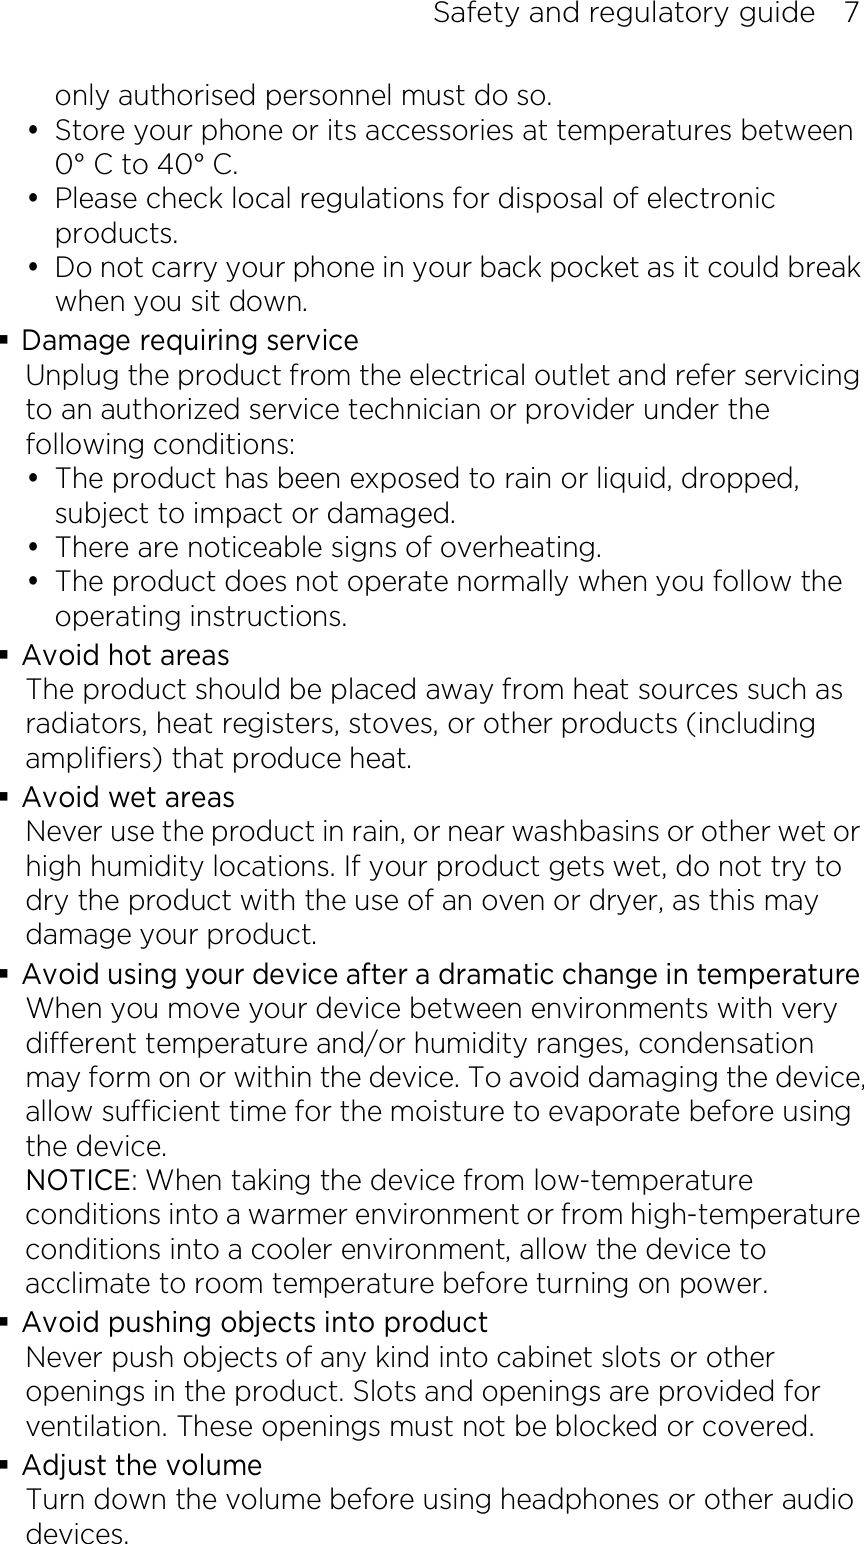 Safety and regulatory guide    7 only authorised personnel must do so.  Store your phone or its accessories at temperatures between 0° C to 40° C.  Please check local regulations for disposal of electronic products.  Do not carry your phone in your back pocket as it could break when you sit down.  Damage requiring service Unplug the product from the electrical outlet and refer servicing to an authorized service technician or provider under the following conditions:  The product has been exposed to rain or liquid, dropped, subject to impact or damaged.  There are noticeable signs of overheating.  The product does not operate normally when you follow the operating instructions.  Avoid hot areas The product should be placed away from heat sources such as radiators, heat registers, stoves, or other products (including amplifiers) that produce heat.  Avoid wet areas Never use the product in rain, or near washbasins or other wet or high humidity locations. If your product gets wet, do not try to dry the product with the use of an oven or dryer, as this may damage your product.  Avoid using your device after a dramatic change in temperature When you move your device between environments with very different temperature and/or humidity ranges, condensation may form on or within the device. To avoid damaging the device, allow sufficient time for the moisture to evaporate before using the device. NOTICE: When taking the device from low-temperature conditions into a warmer environment or from high-temperature conditions into a cooler environment, allow the device to acclimate to room temperature before turning on power.  Avoid pushing objects into product Never push objects of any kind into cabinet slots or other openings in the product. Slots and openings are provided for ventilation. These openings must not be blocked or covered.  Adjust the volume Turn down the volume before using headphones or other audio devices. 